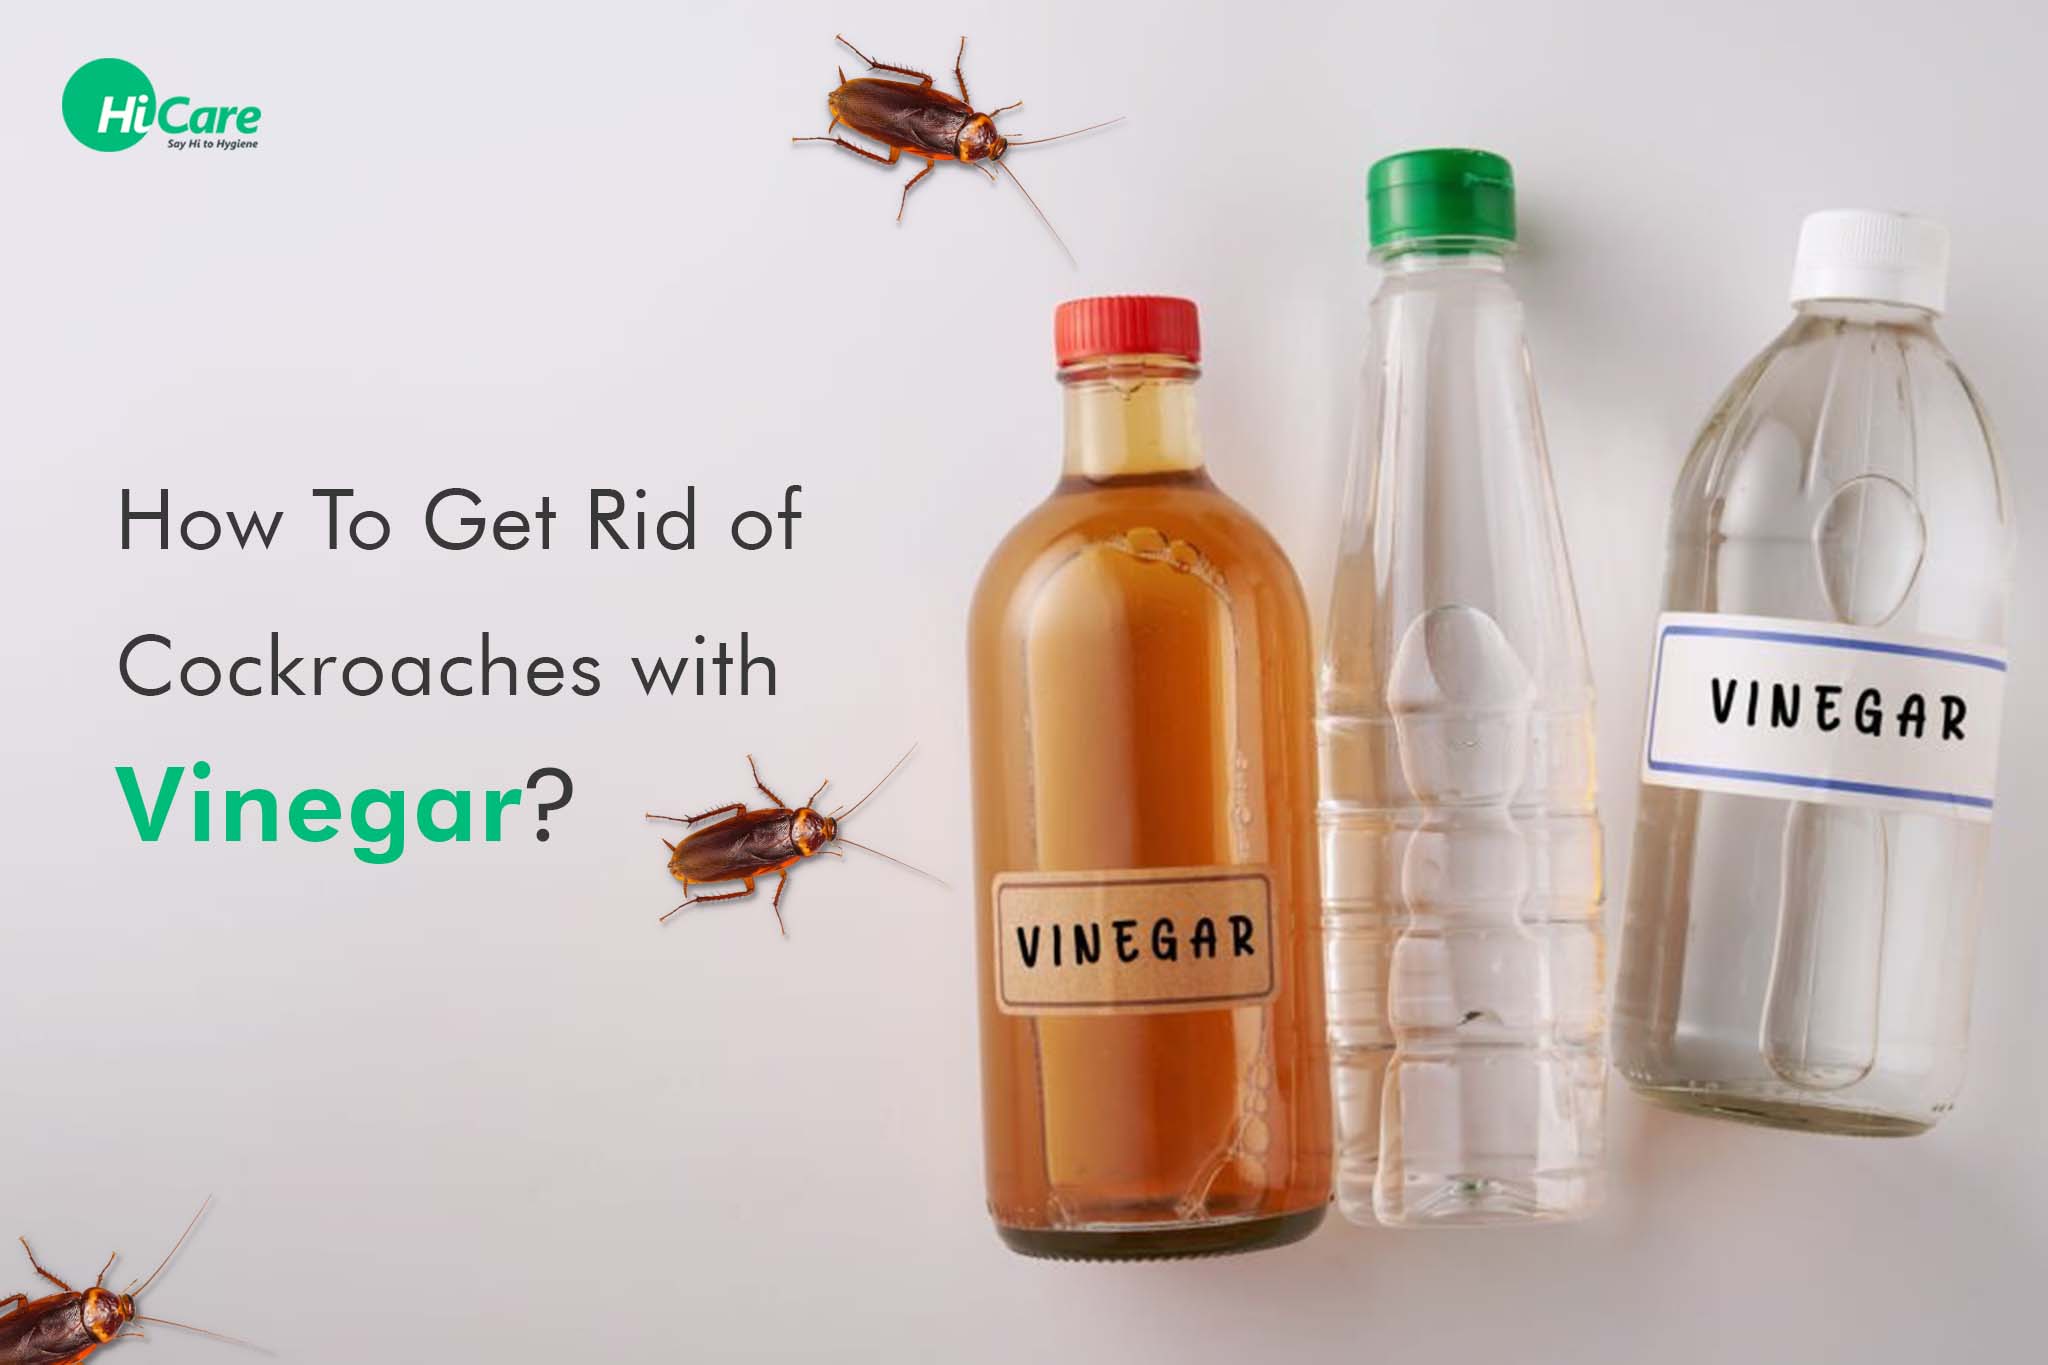 https://hicare.in/blog/wp-content/uploads/2023/02/how-to-get-rid-of-cockroaches-with-vinegar.jpg